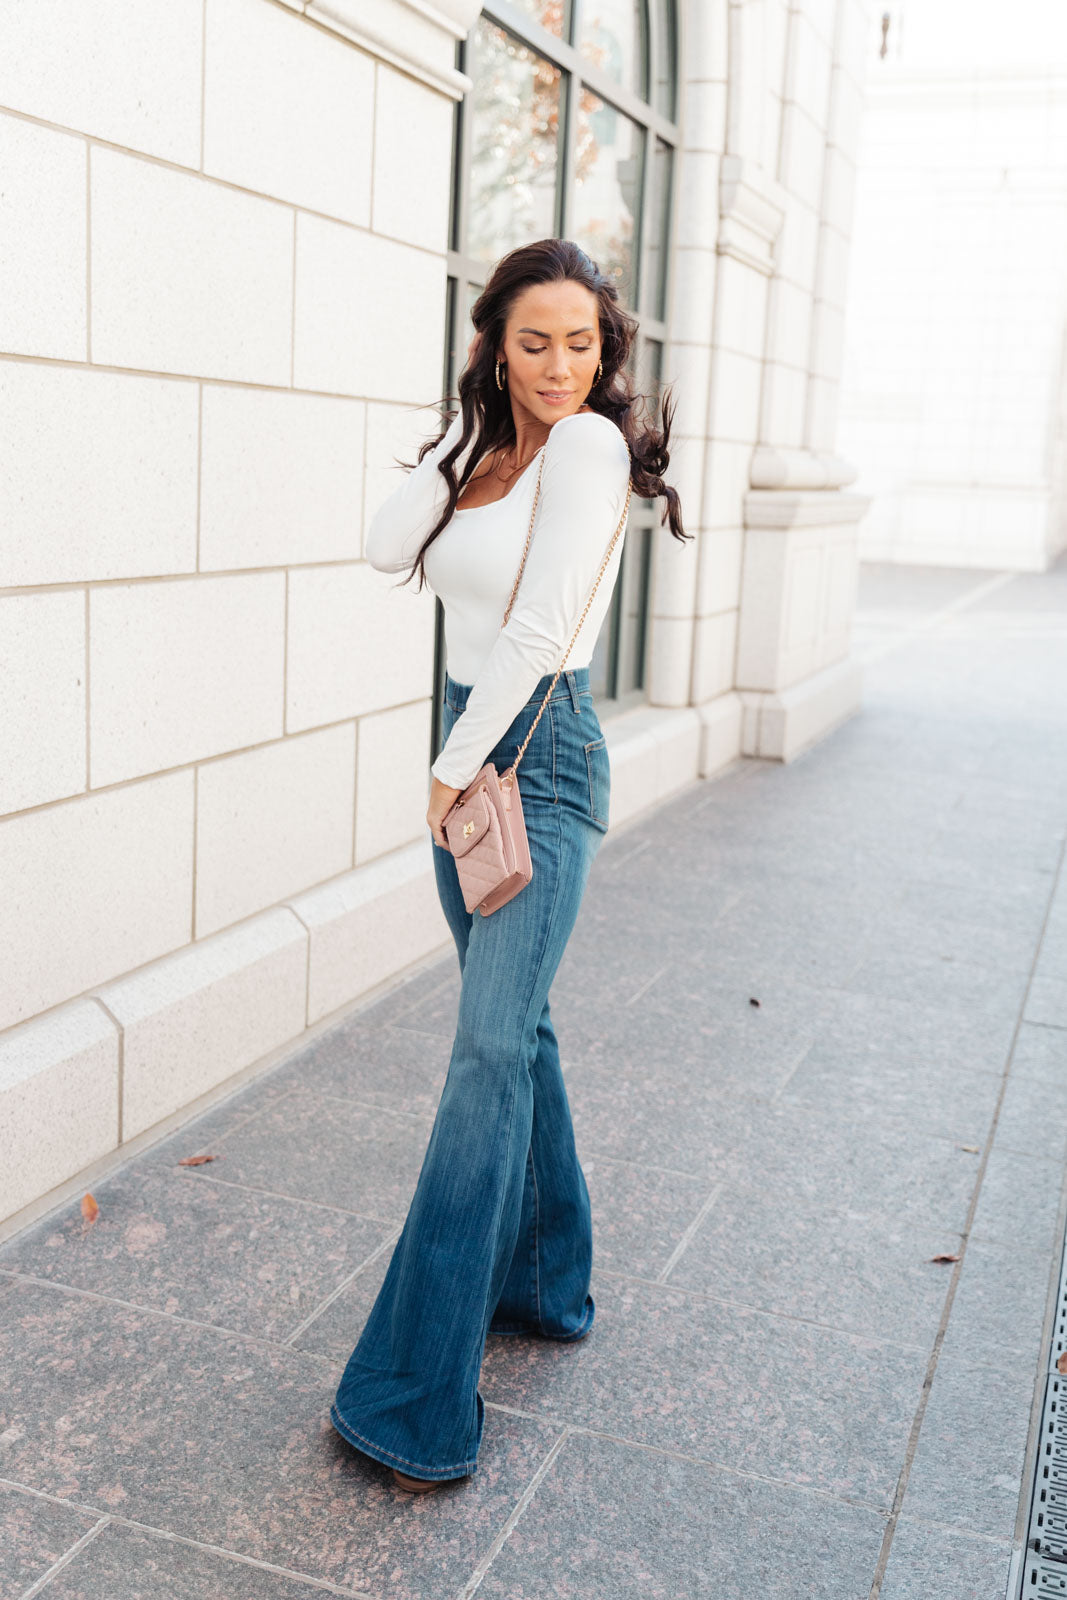 15 Cute Outfits With Flare Jeans To Wear For Casual Days